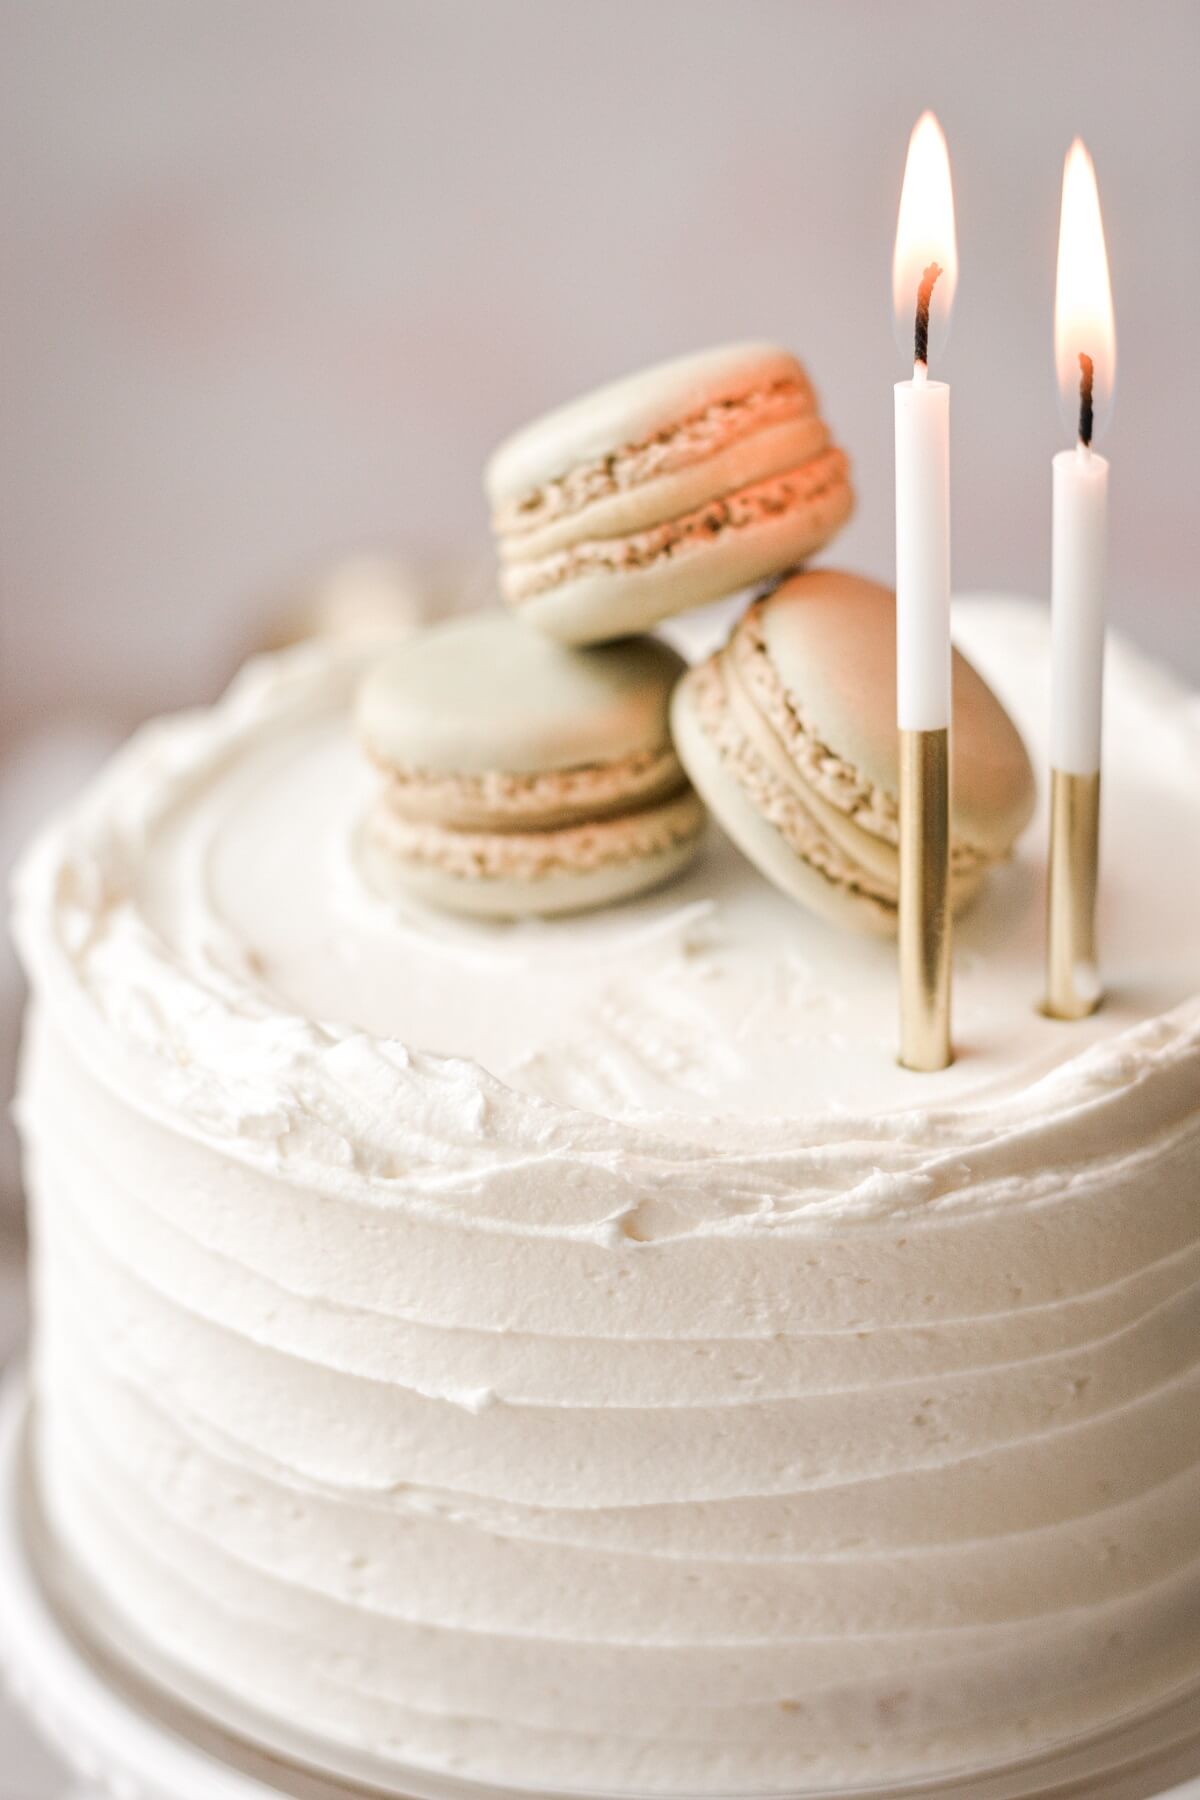 Mini vanilla cake topped with birthday candles and French macarons.